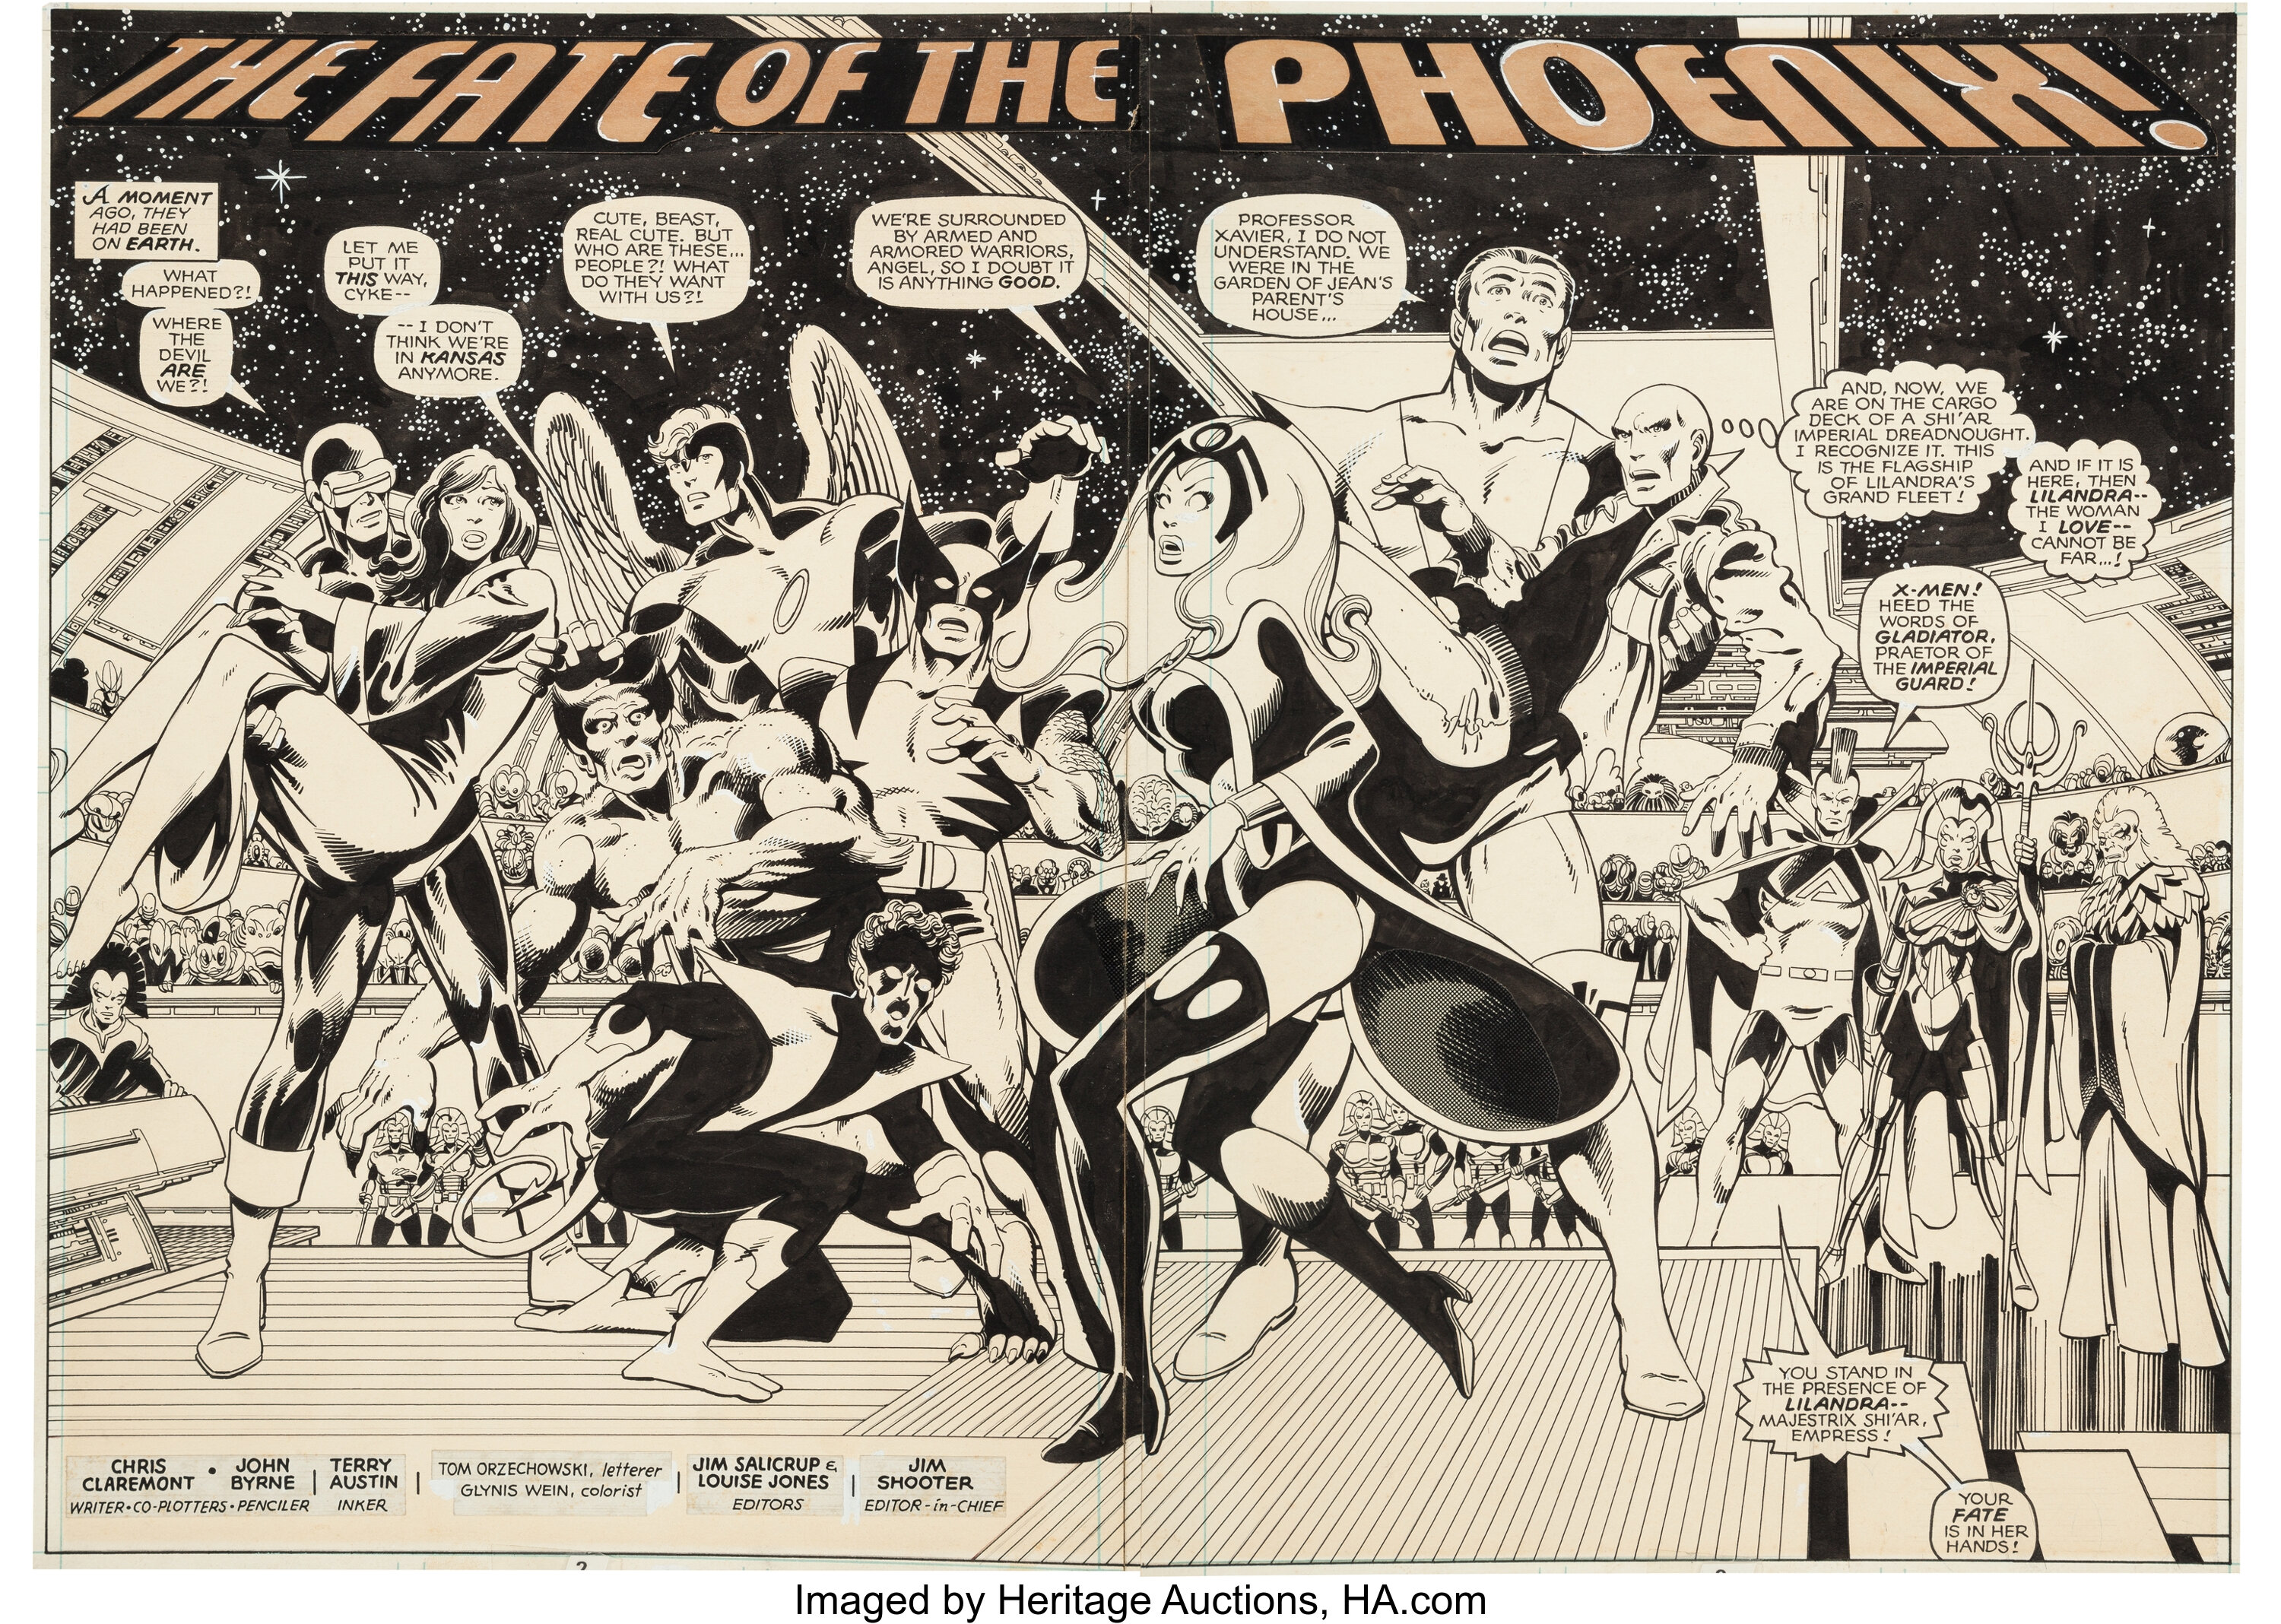 John Byrne and Terry Austin X-Men #137 Double Splash Pages 2-3 